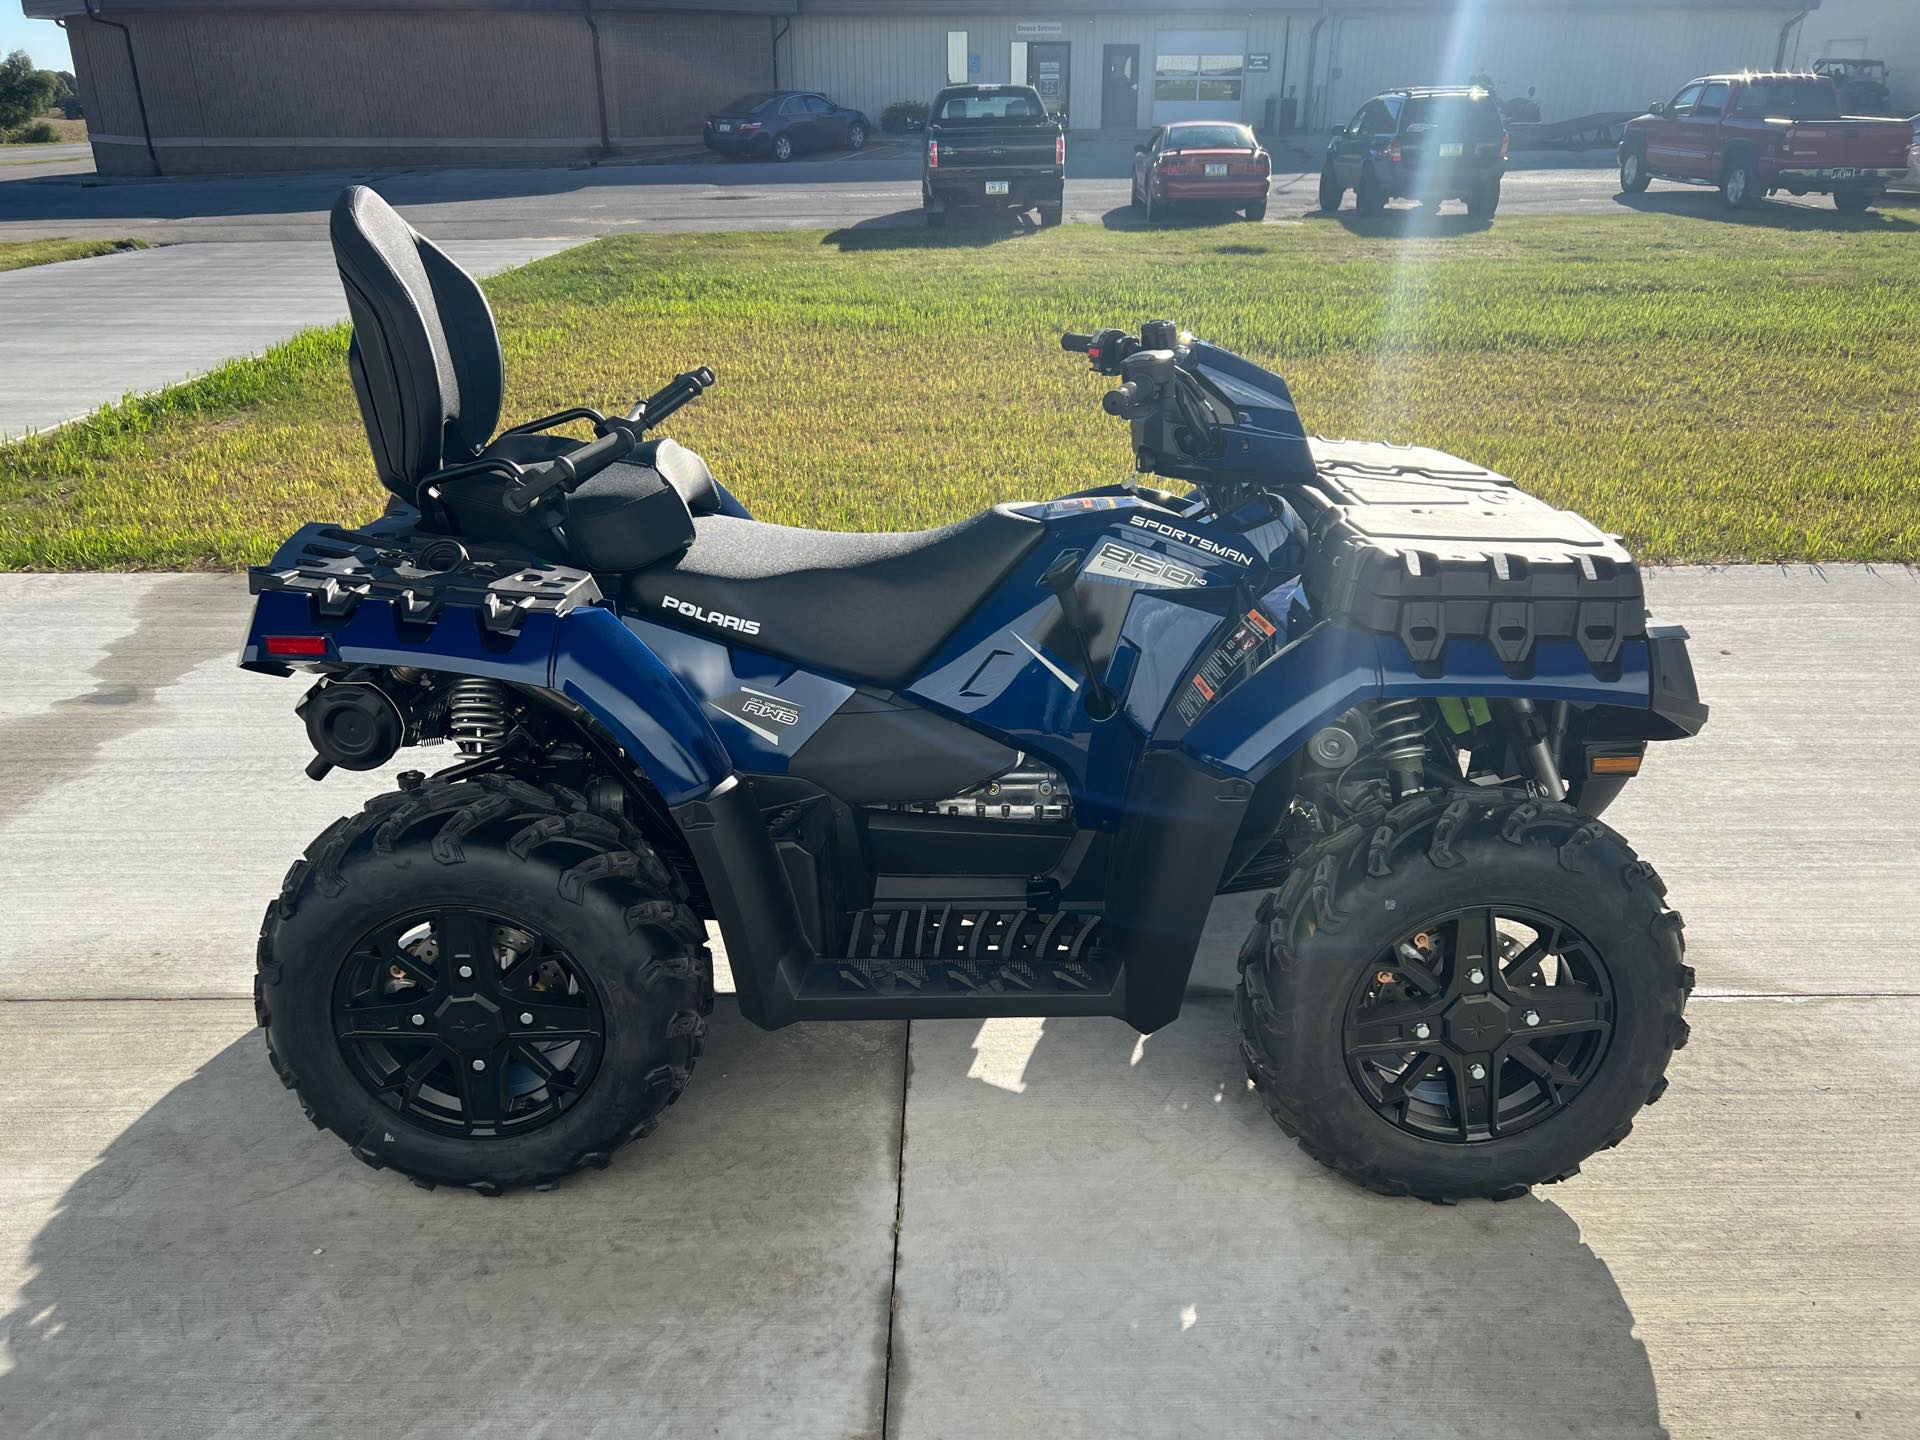 Iron Hill Powersports Waukon IA Featuring New Pre Owned Polaris 